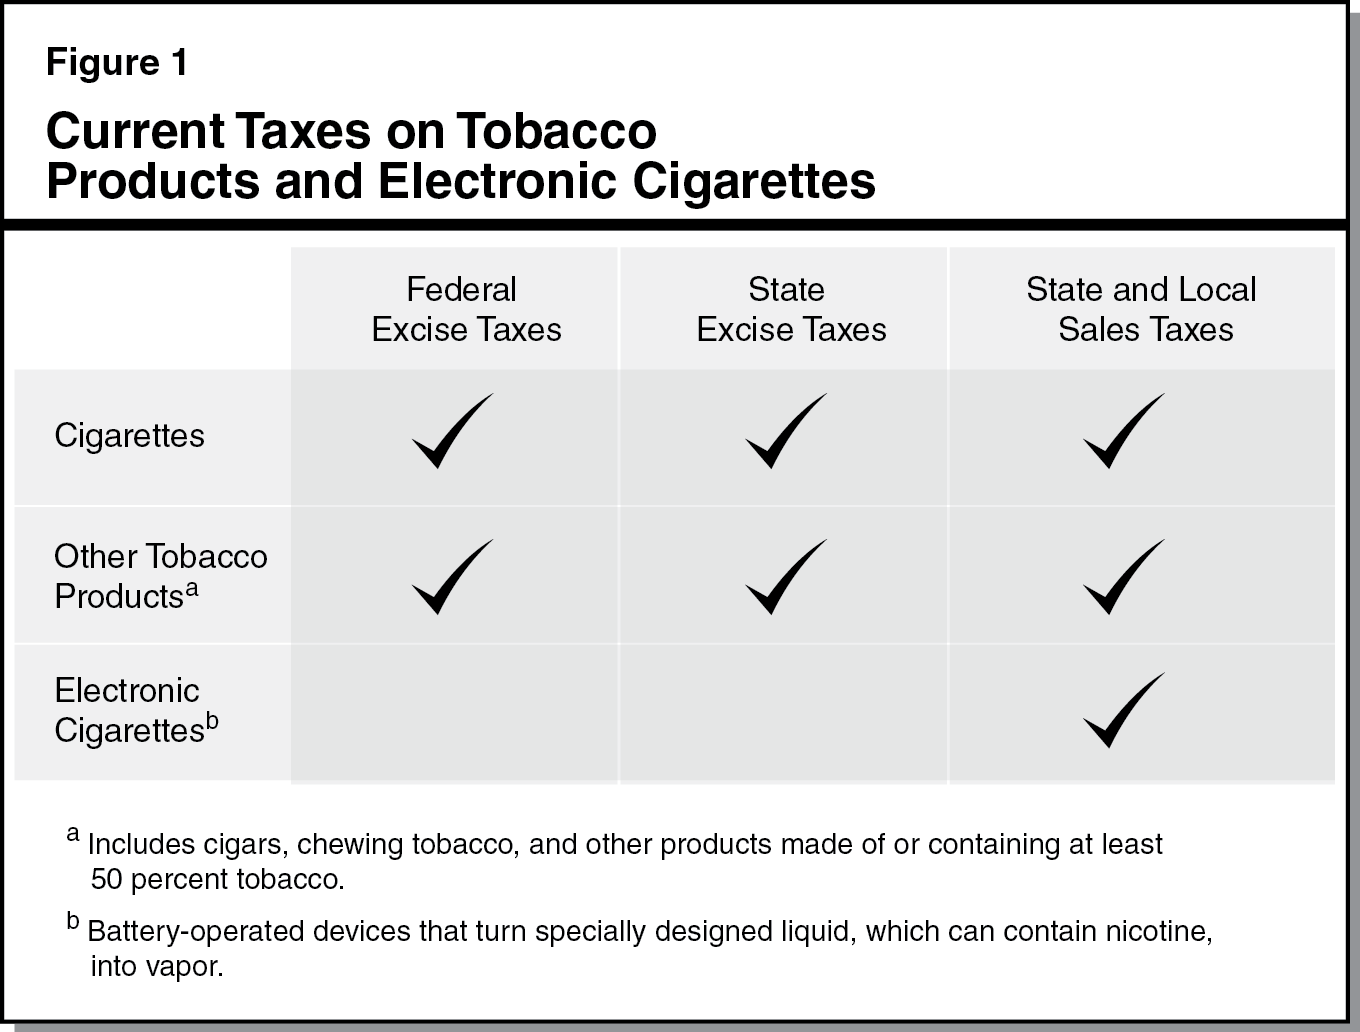 Figure 1 - Current Taxes on Tobacco Products and Electronic Cigarettes